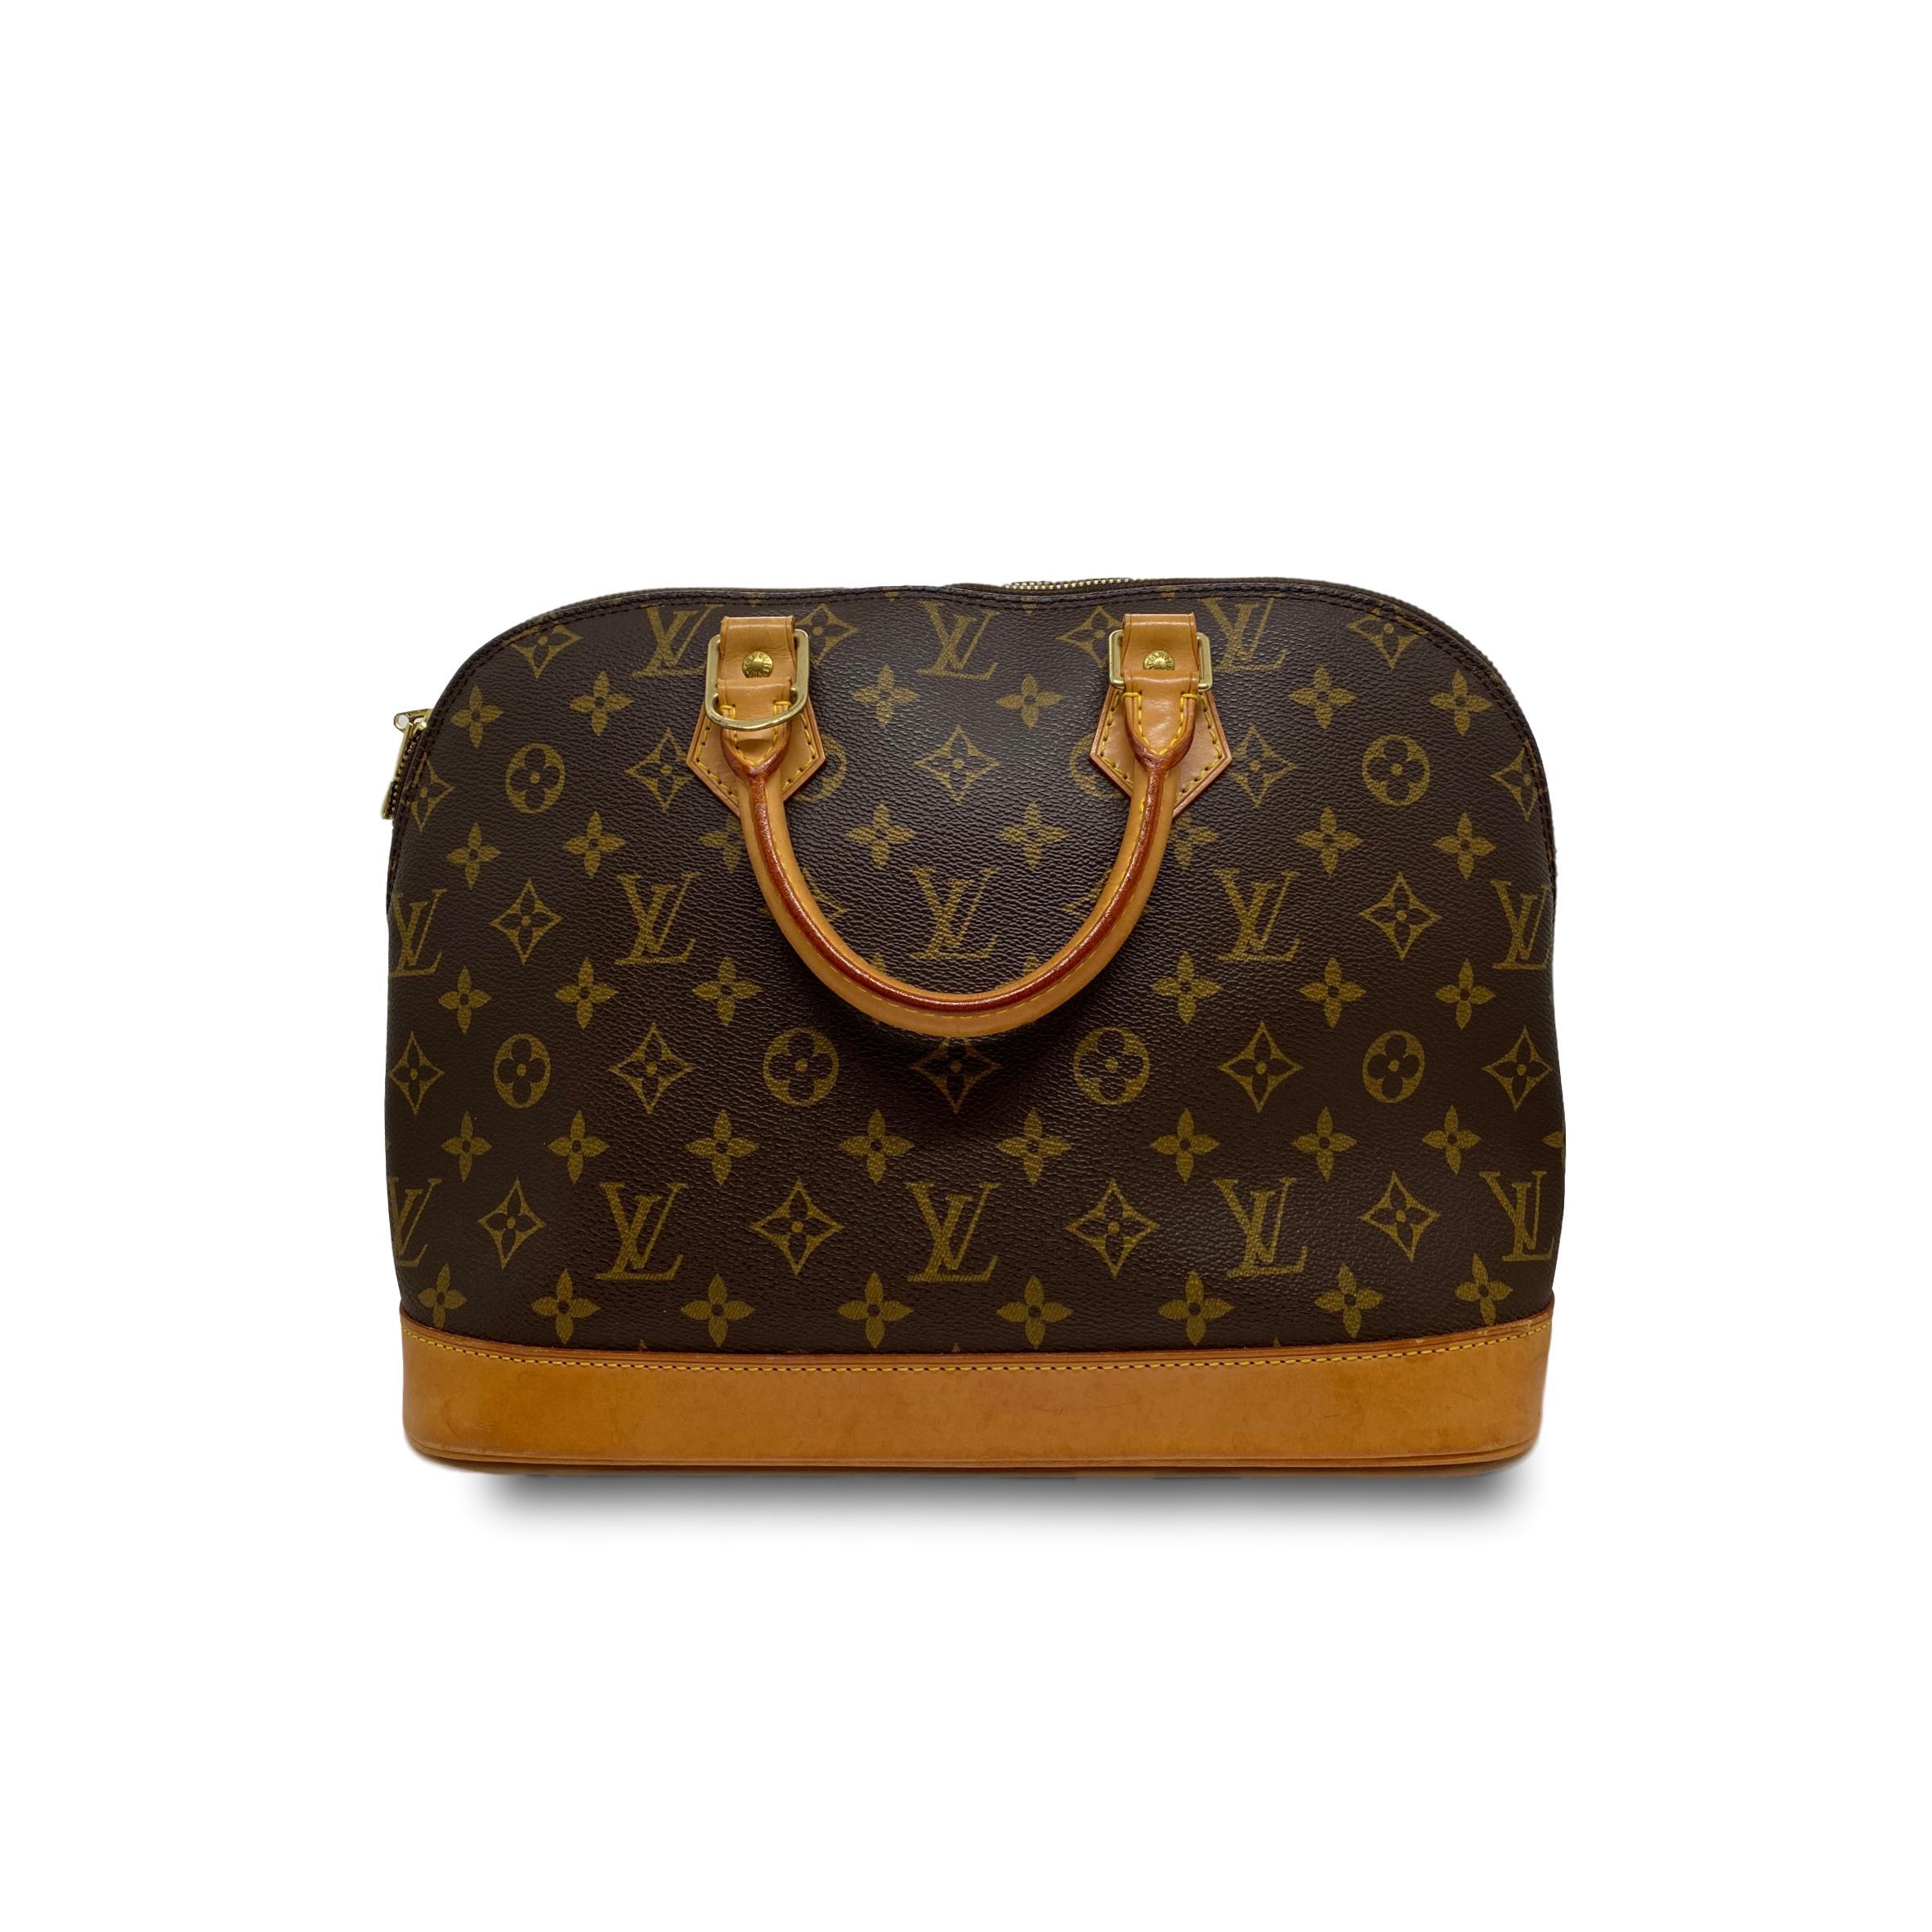 The Louis Vuitton Alma is a classic closet staple, first introduced and inspired by the architect of the Art Deco era of the early 1930's. Originally designed by Gaston-Louis Vuitton, the bag was originally named “Champs-Elysées” after the famous